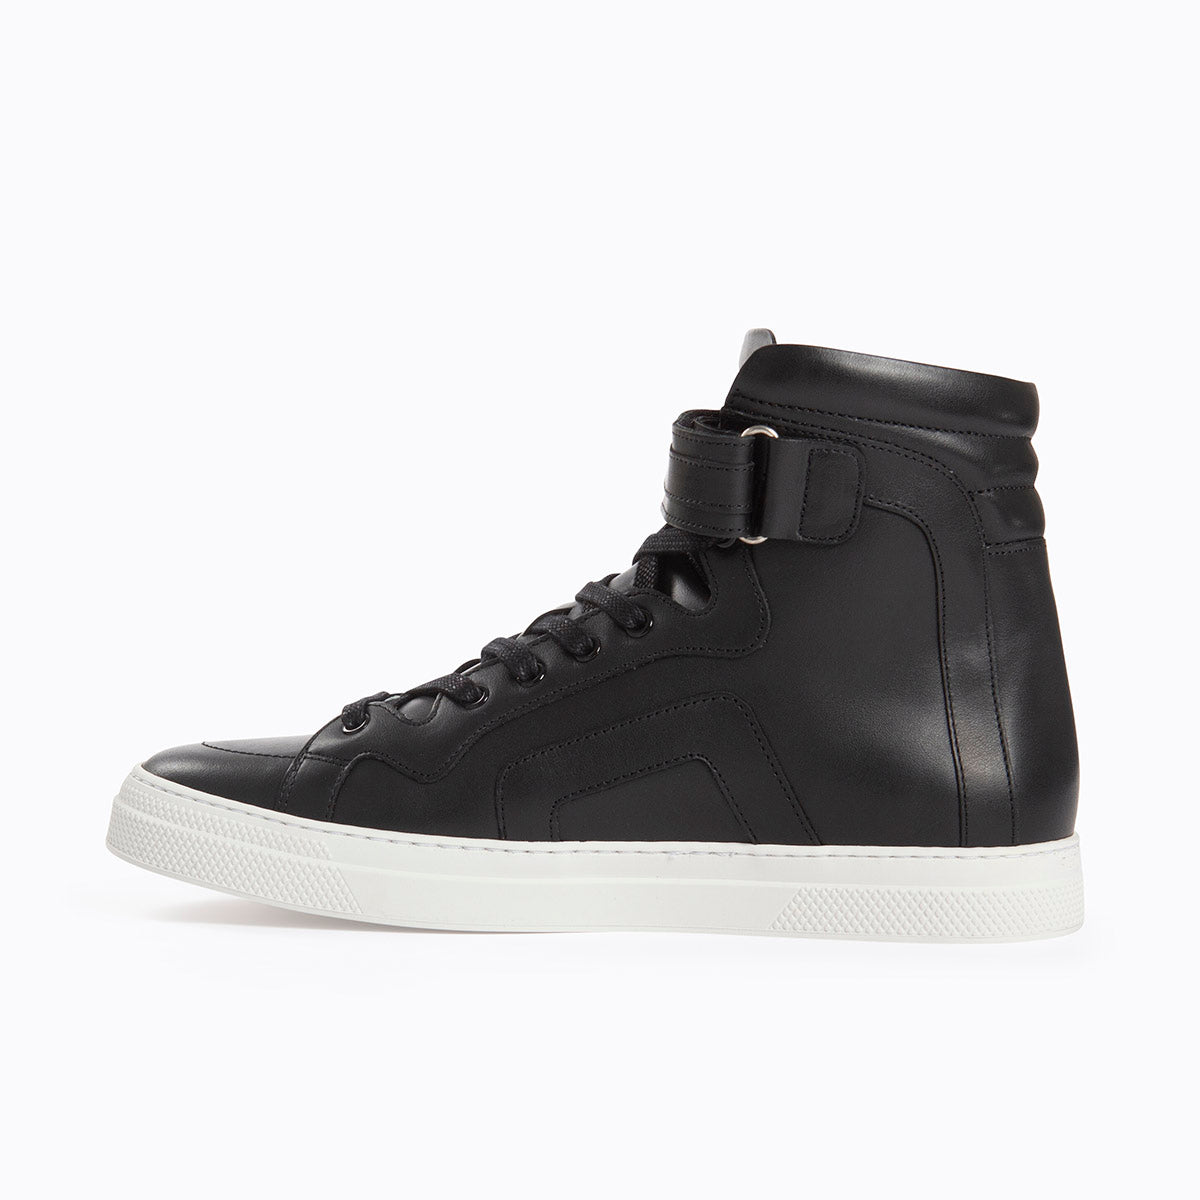 112 high-top sneakers for men in black leather — PIERRE HARDY